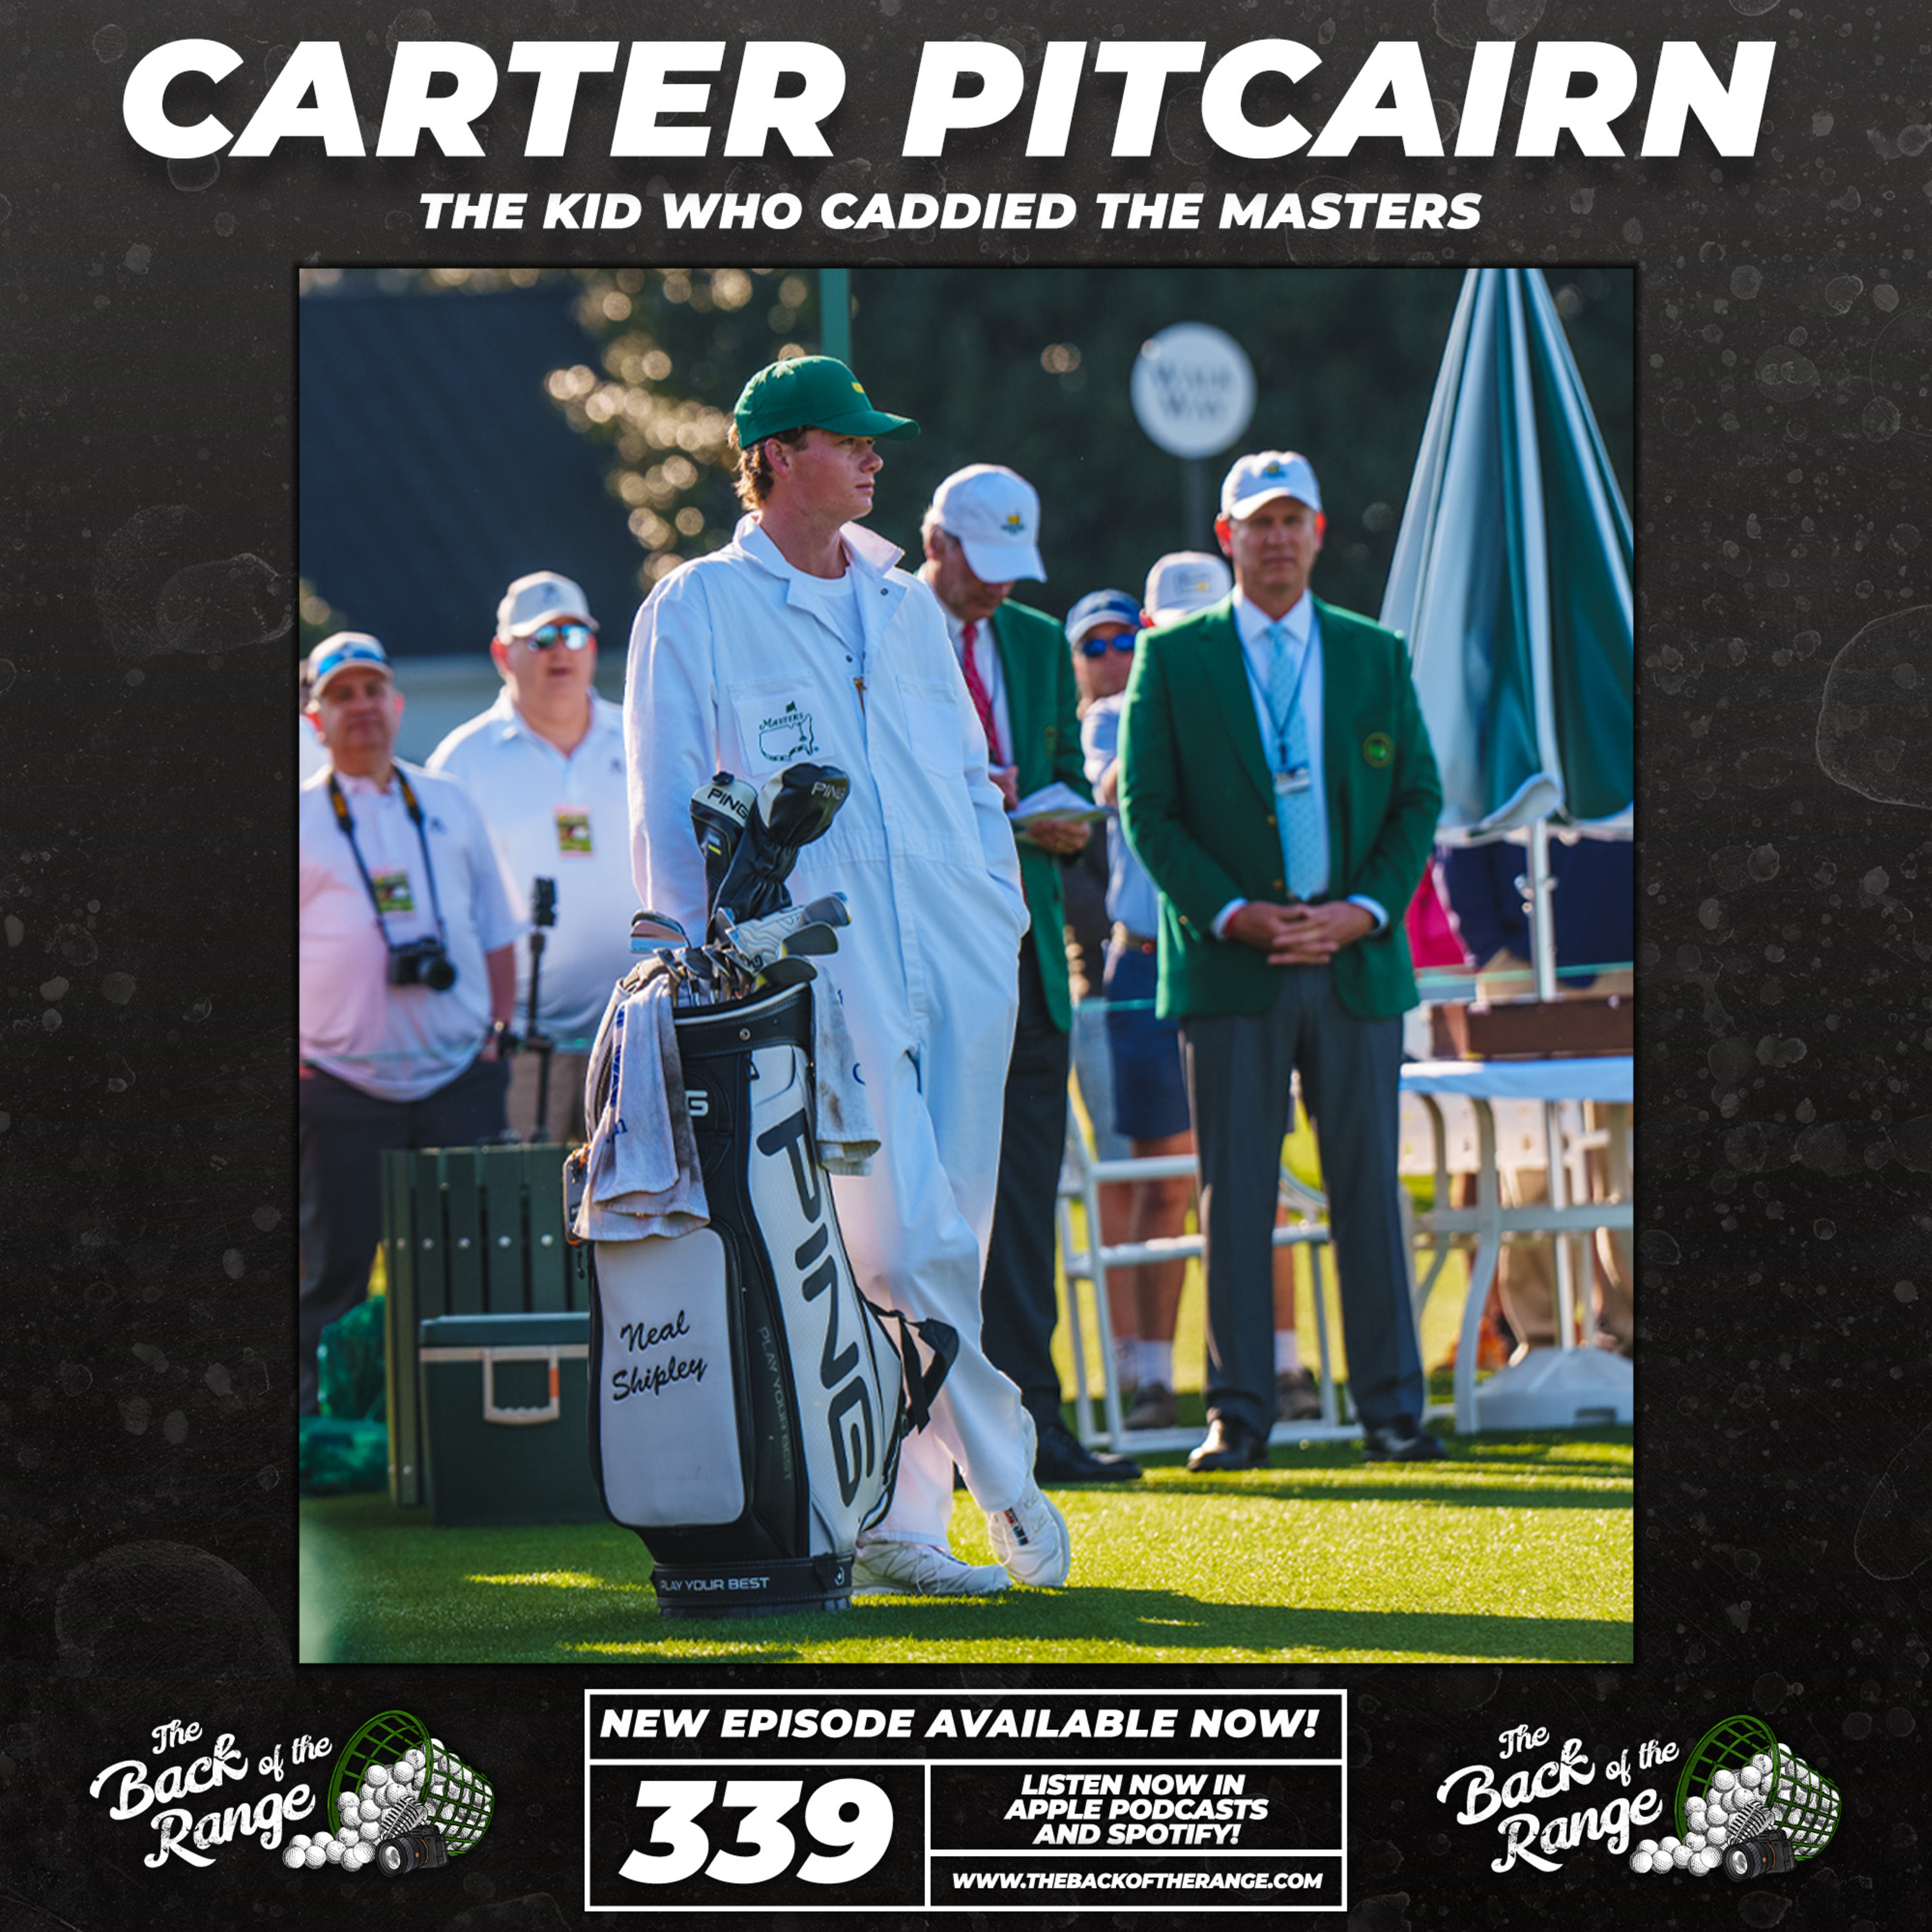 Carter Pitcairn - The Kid who Caddied The Masters